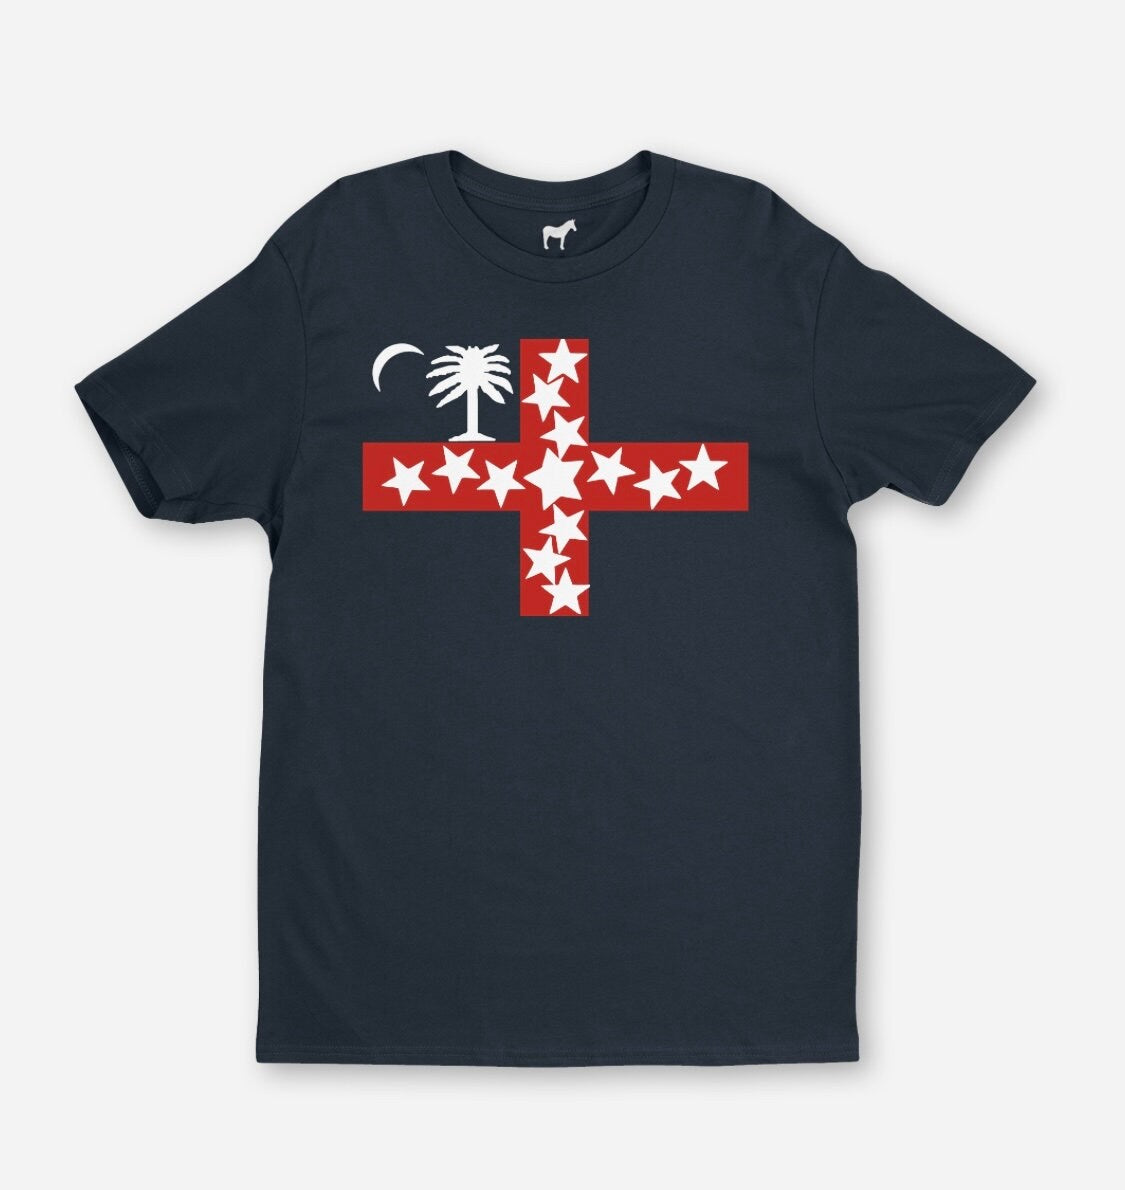 South Carolina Sovereignty State Flag Shirt - Chester County